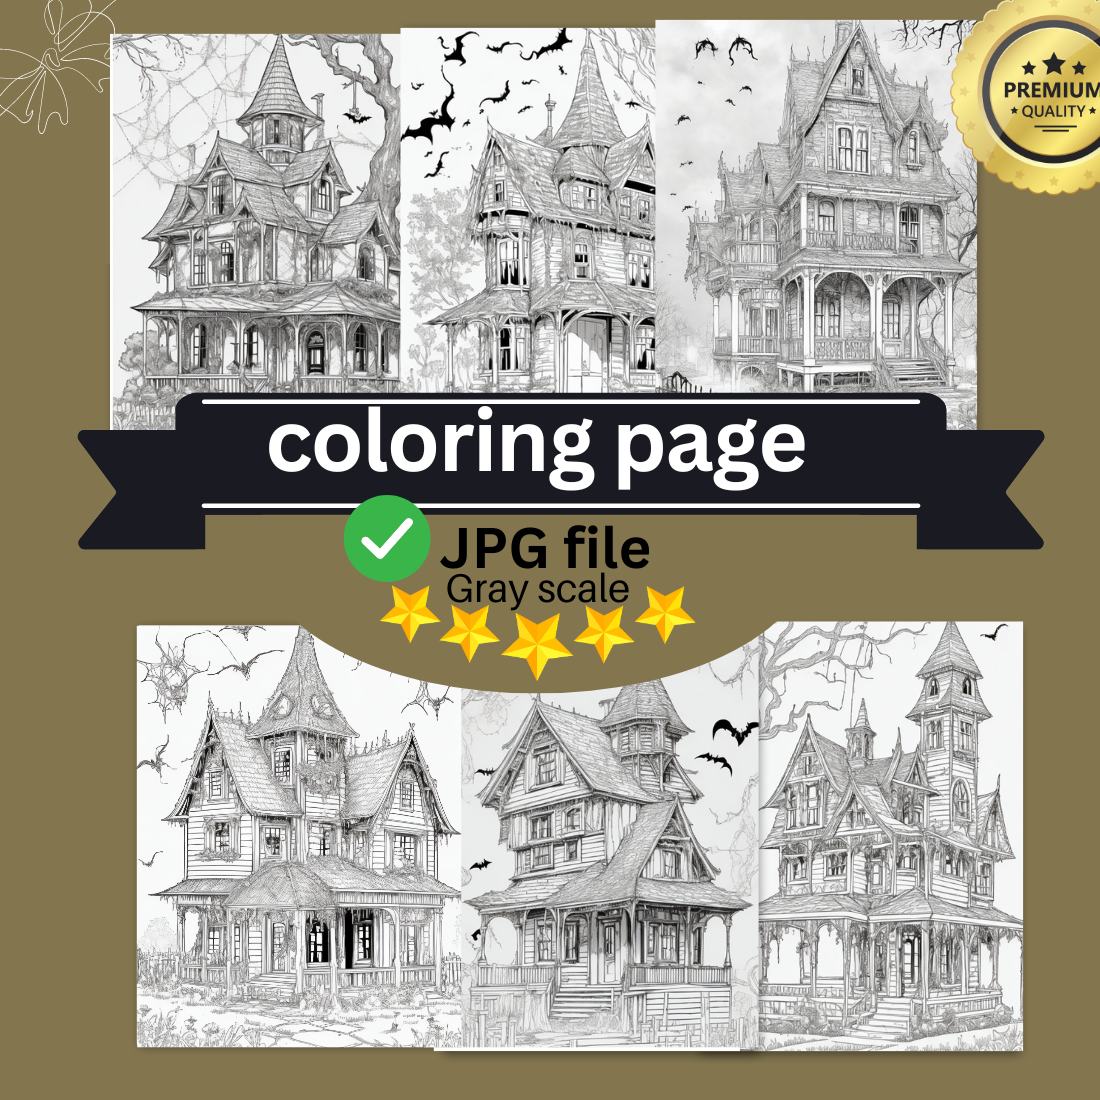 A haunted house with ghosts and cobwebs coloring page for adult 3 cover image.